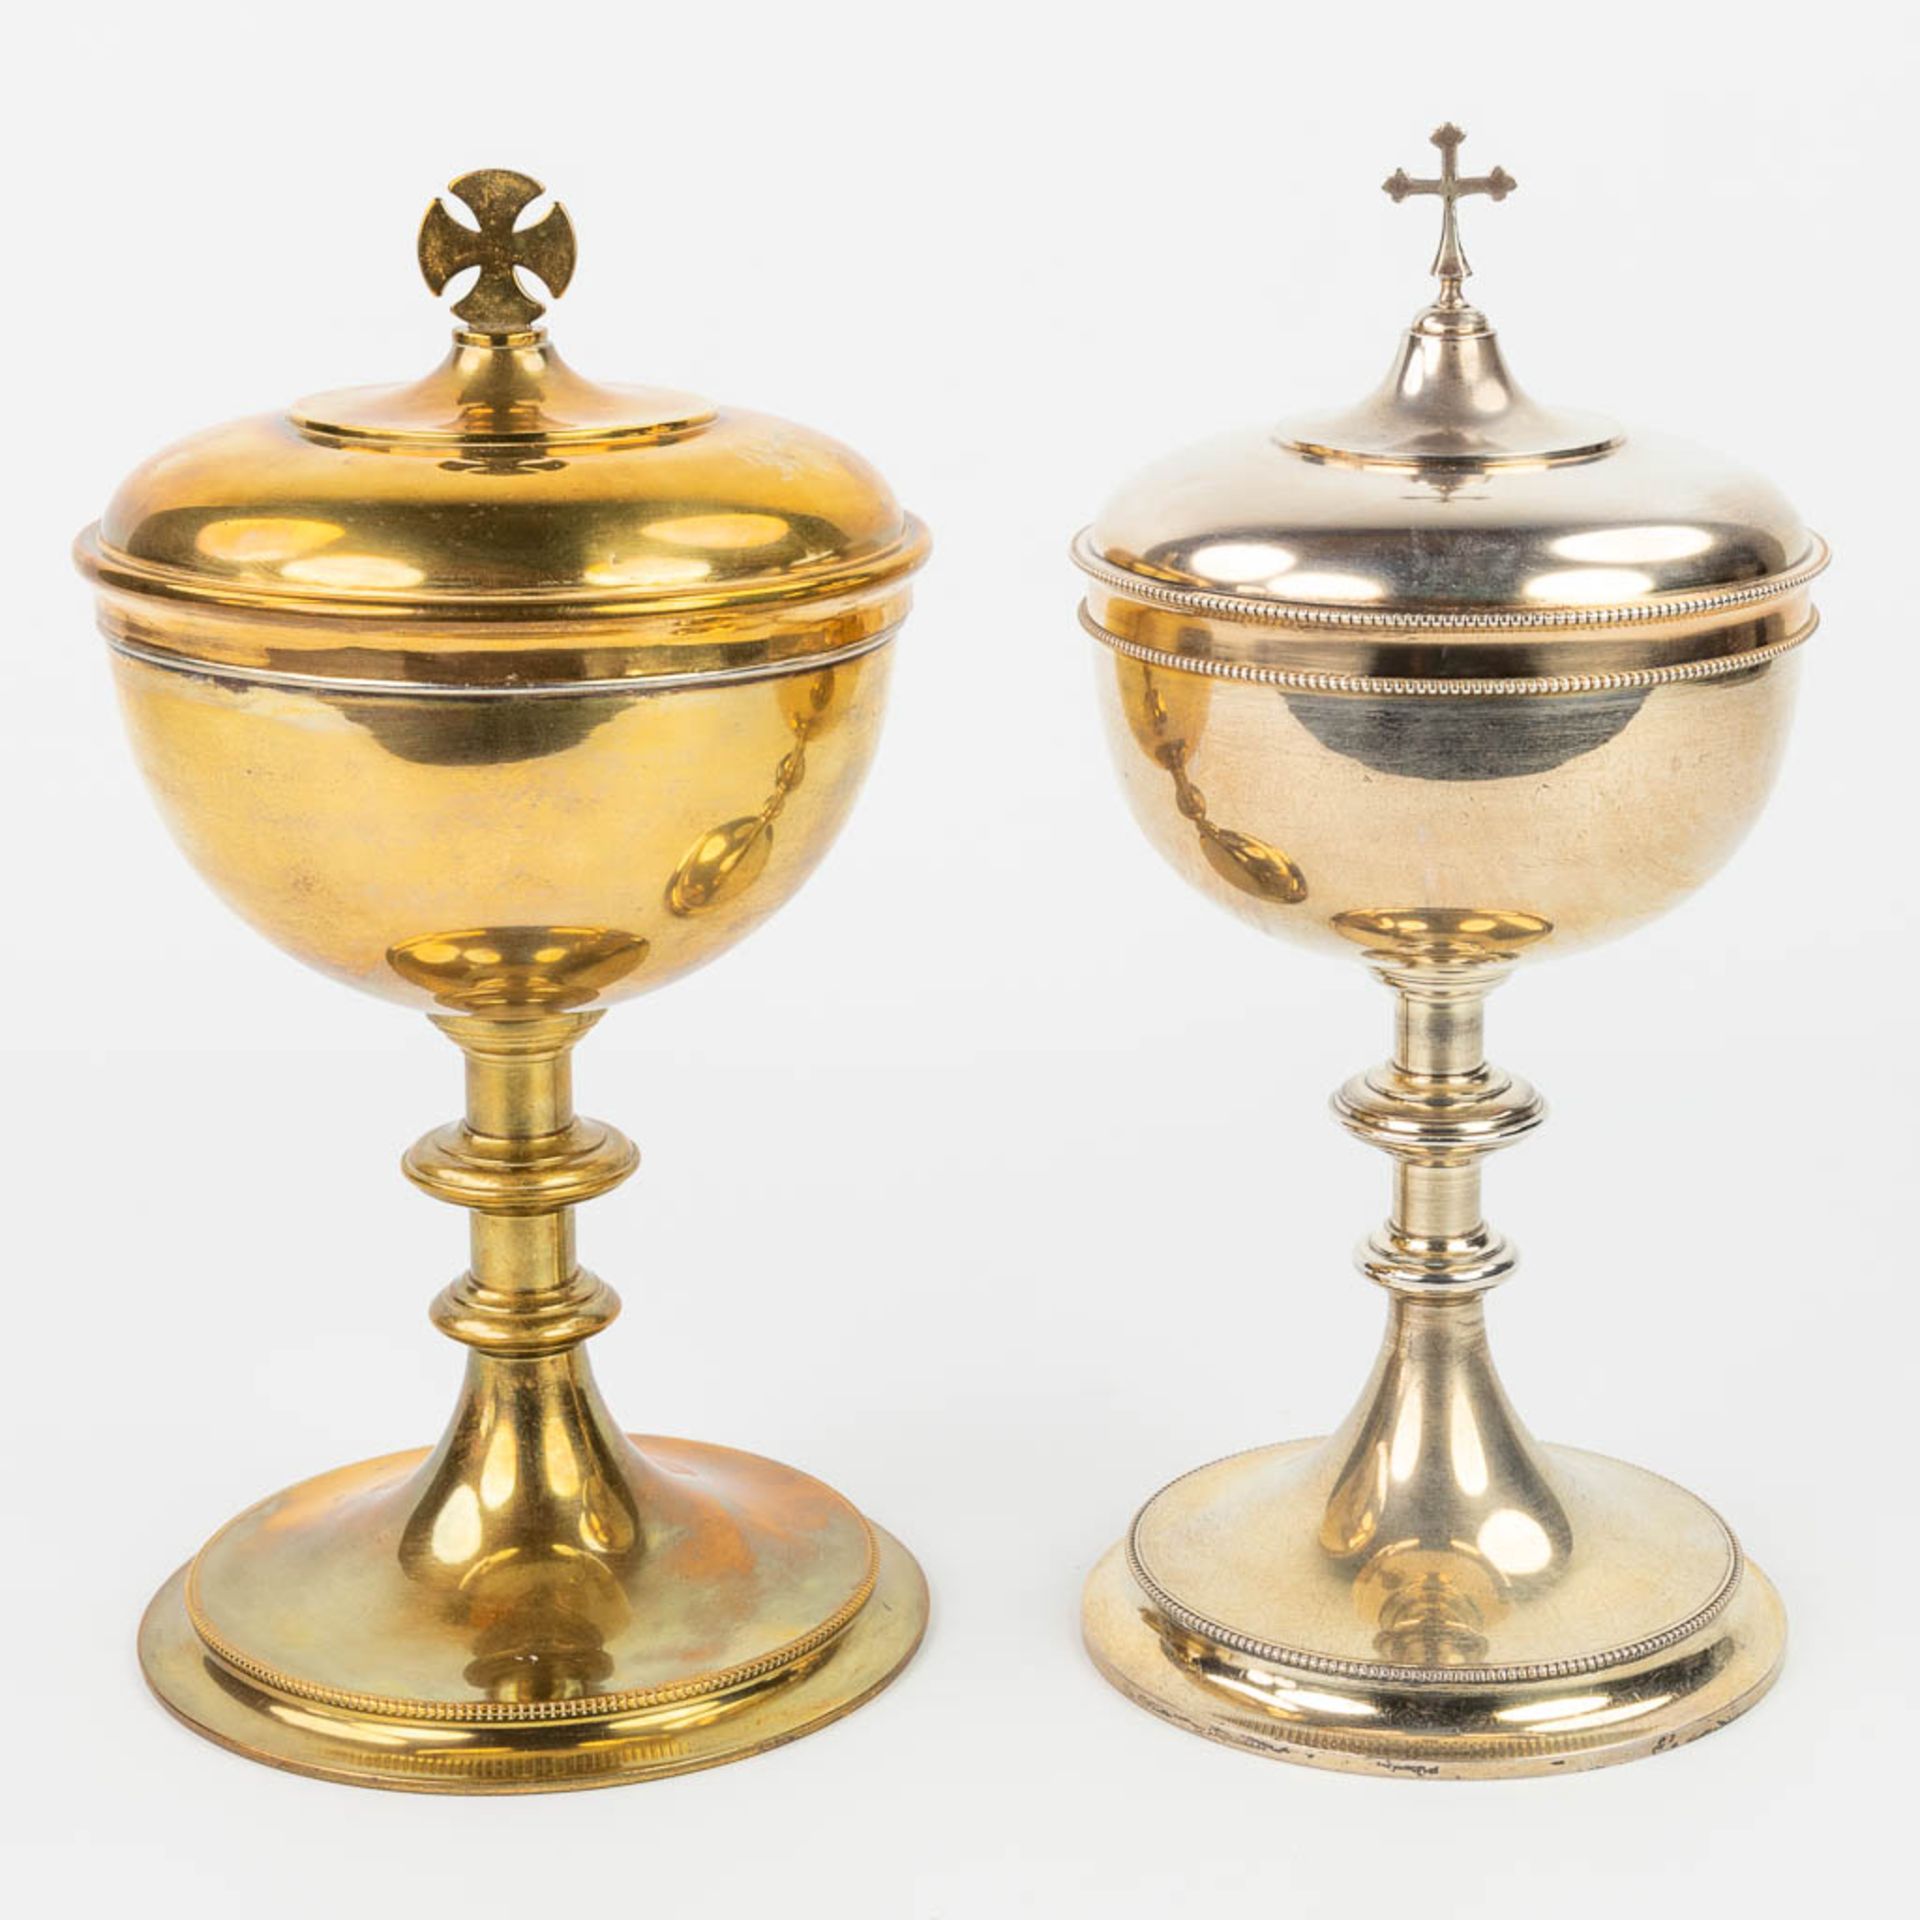 A collection of 4 large ciboria and a chalice made of silver and gold plated metal. - Image 18 of 24